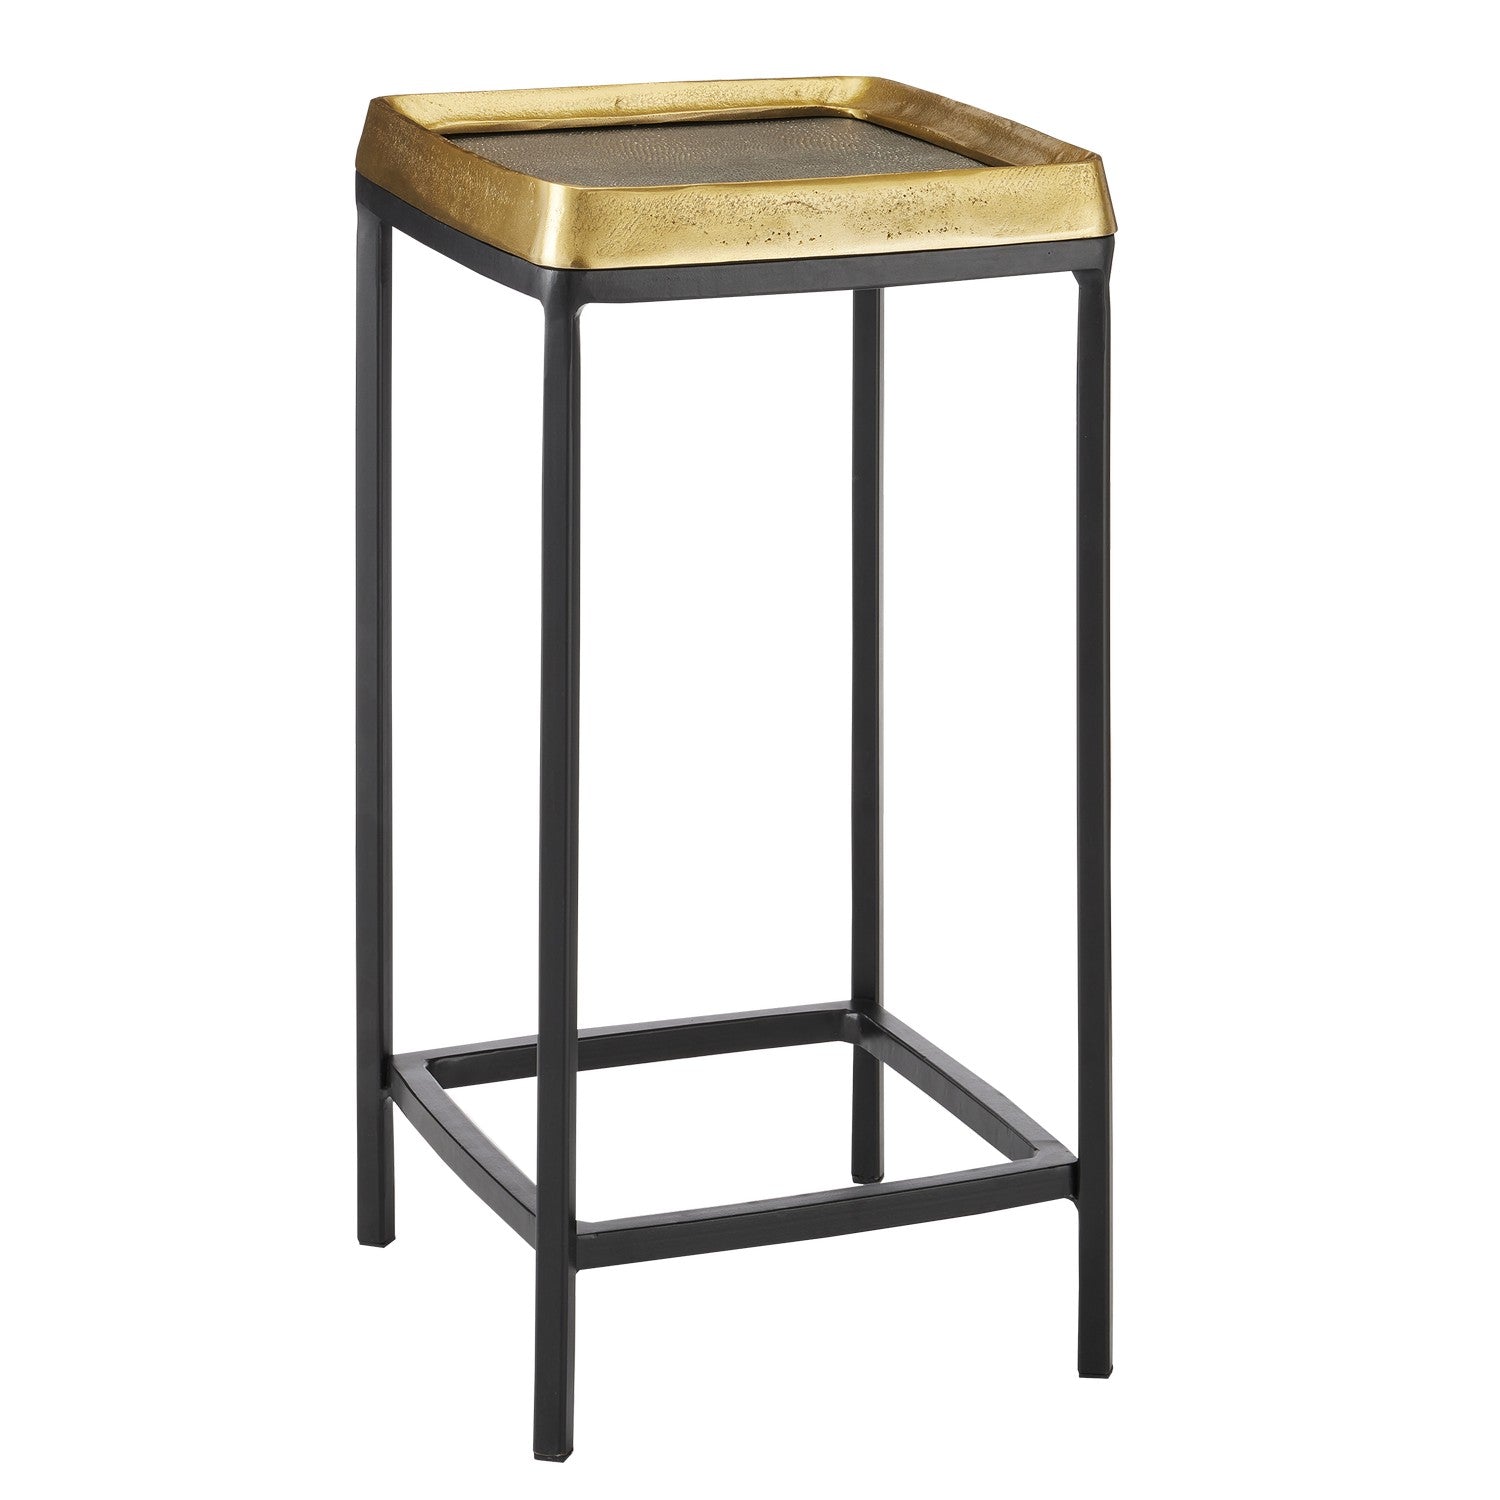 Currey and Company - Accent Table - Tanay - Antique Brass/Graphite/Black- Union Lighting Luminaires Decor